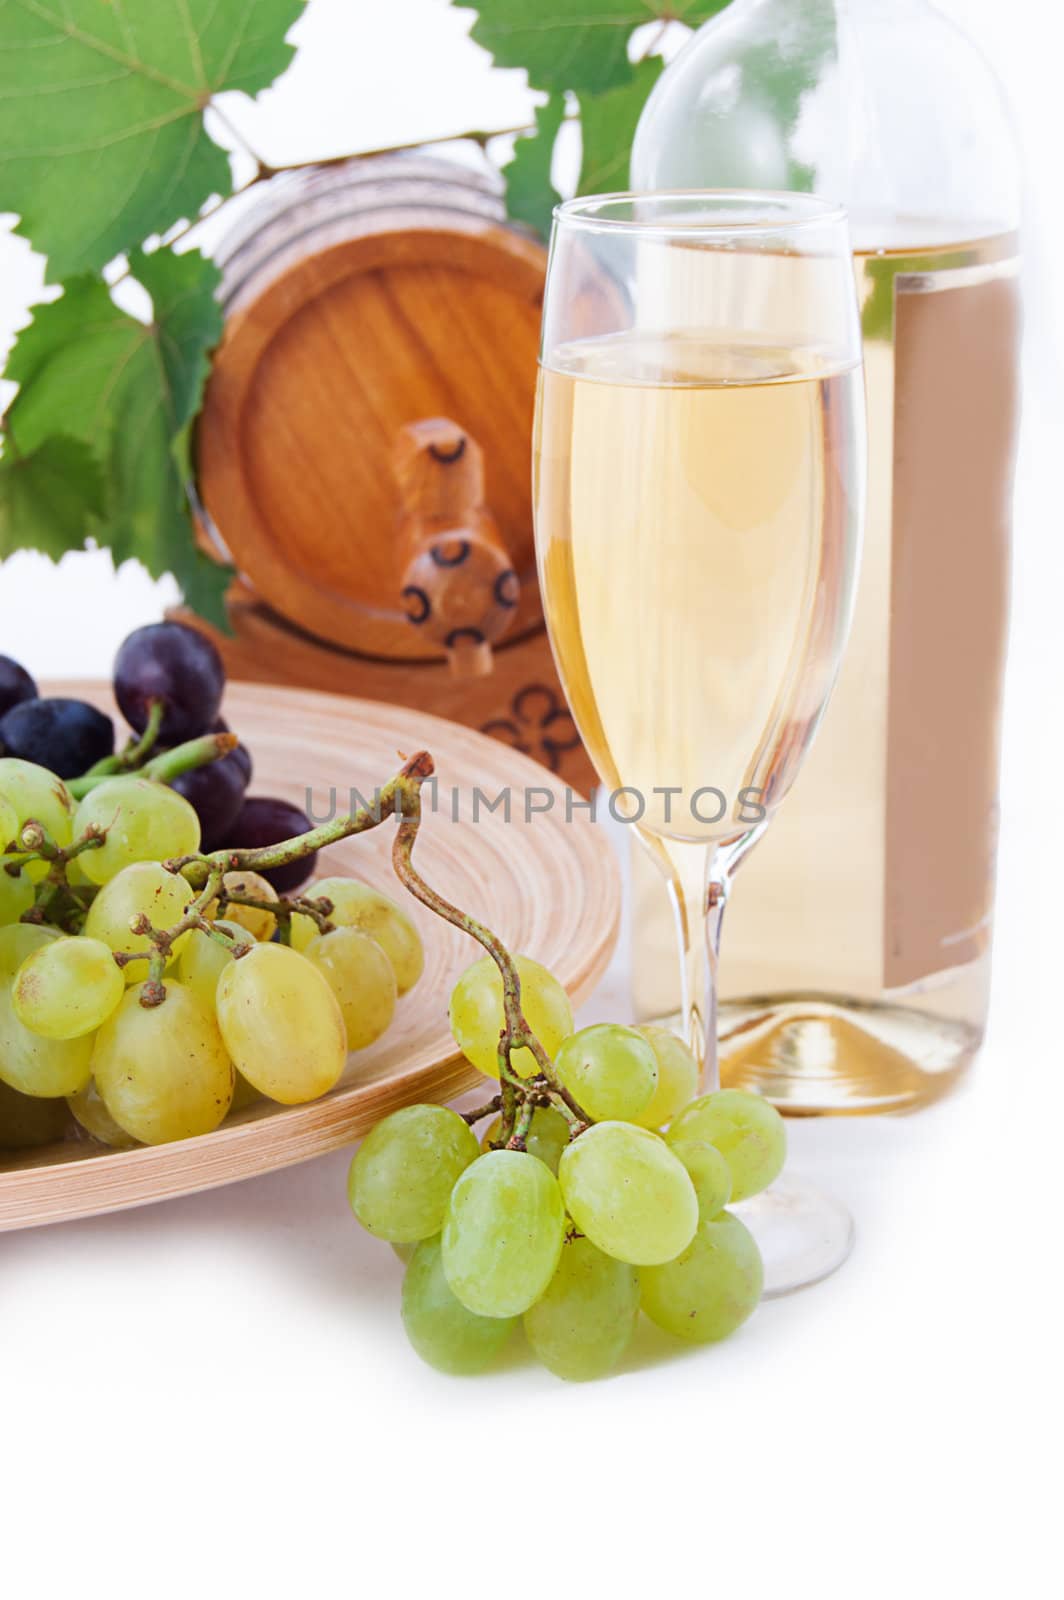 White wine bottle, glass and cask with grapes by Angel_a